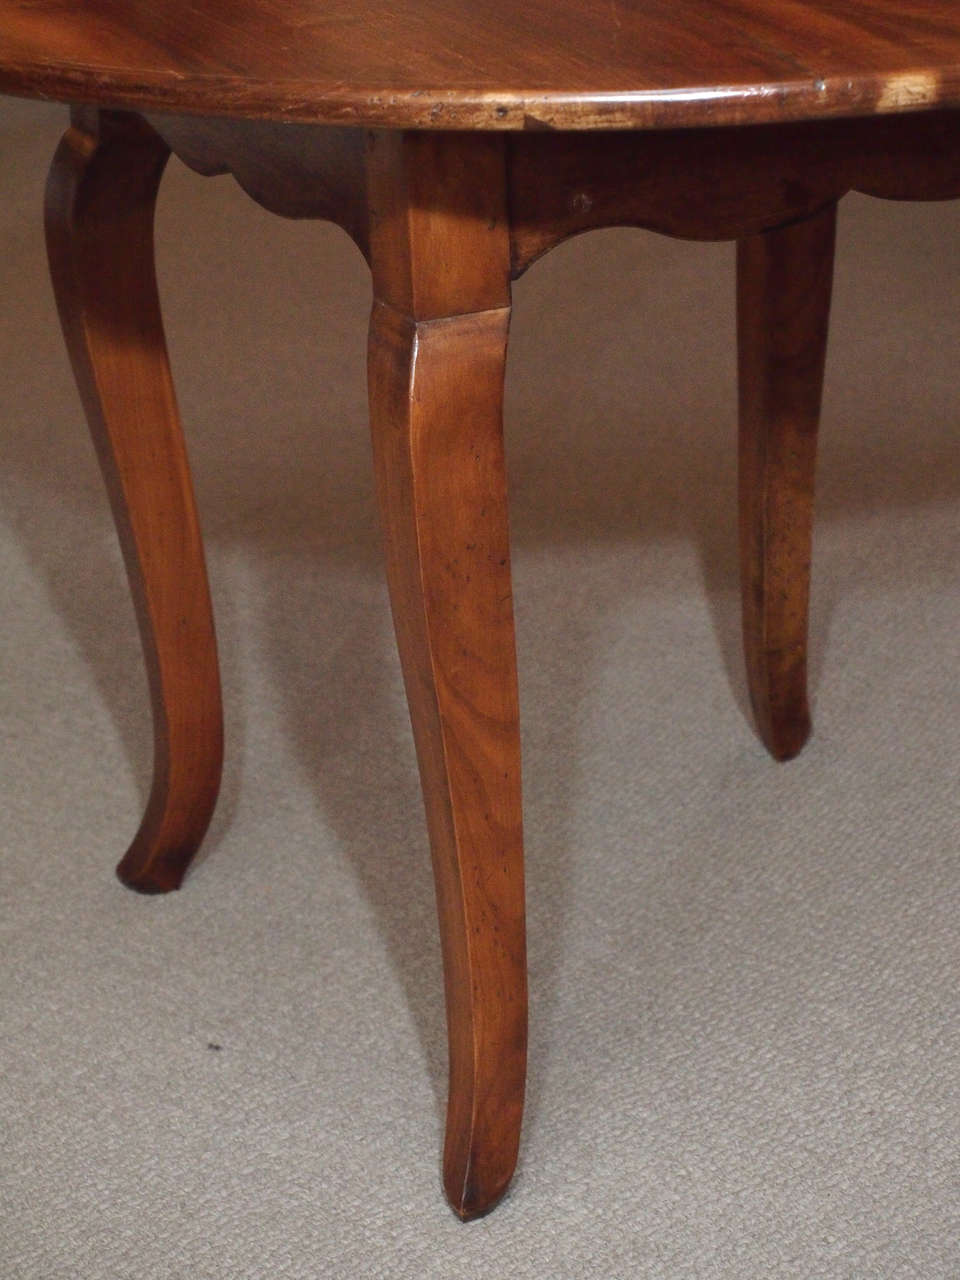 Antique French Provincial Walnut Round Table On Cabriole Legs at 1stdibs